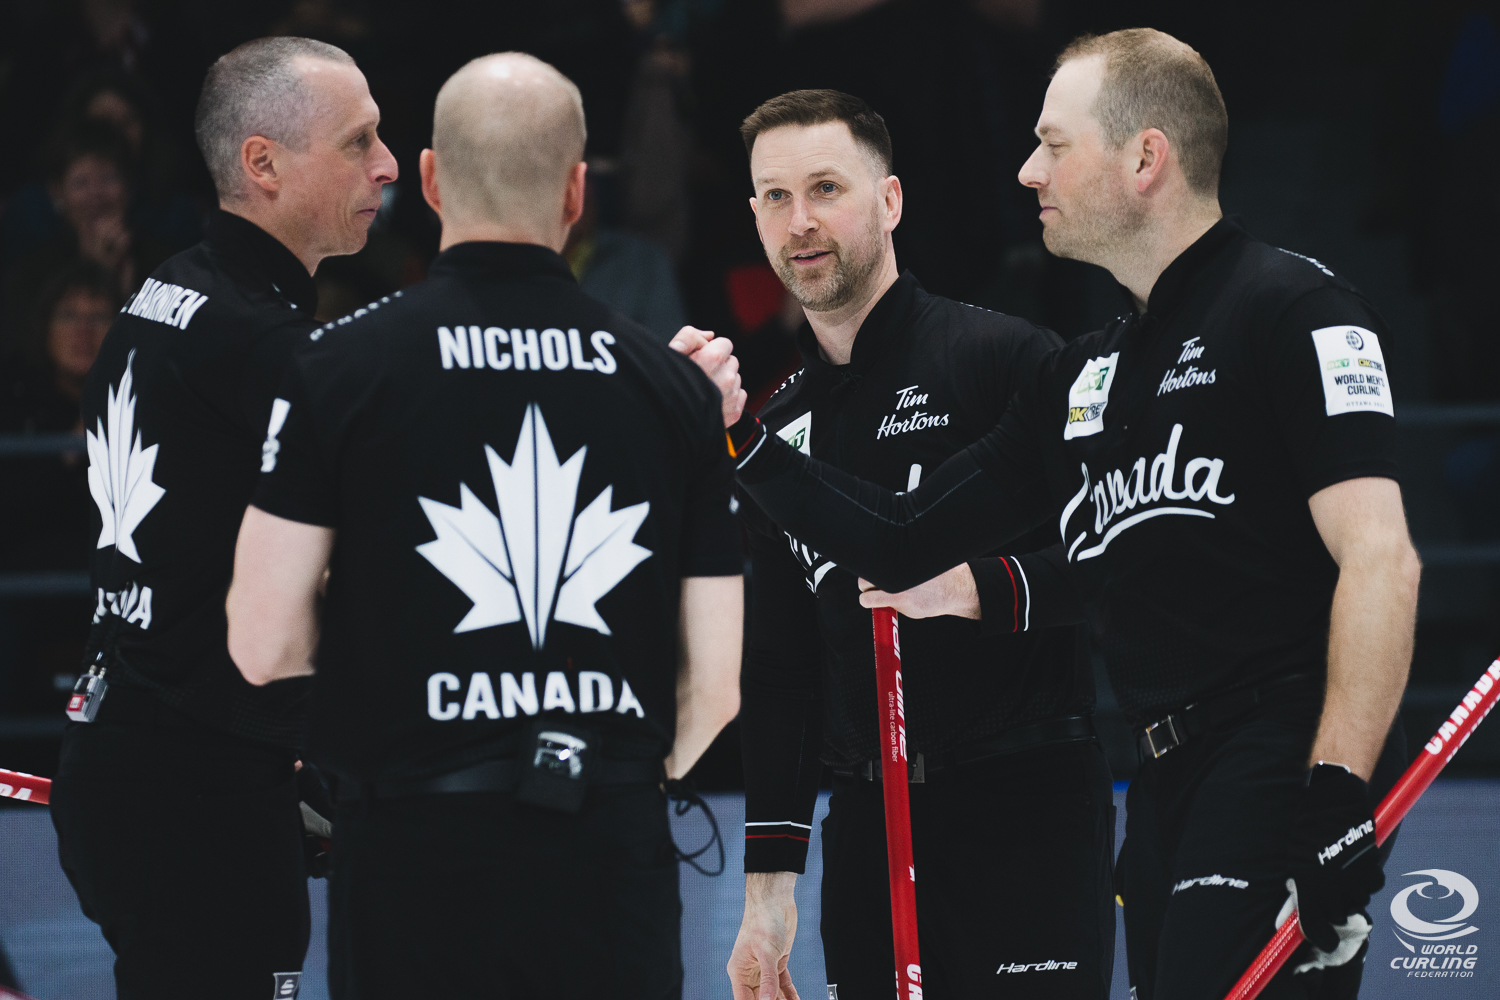 CurlingZone Gushue 1-1 after first day at mens worlds